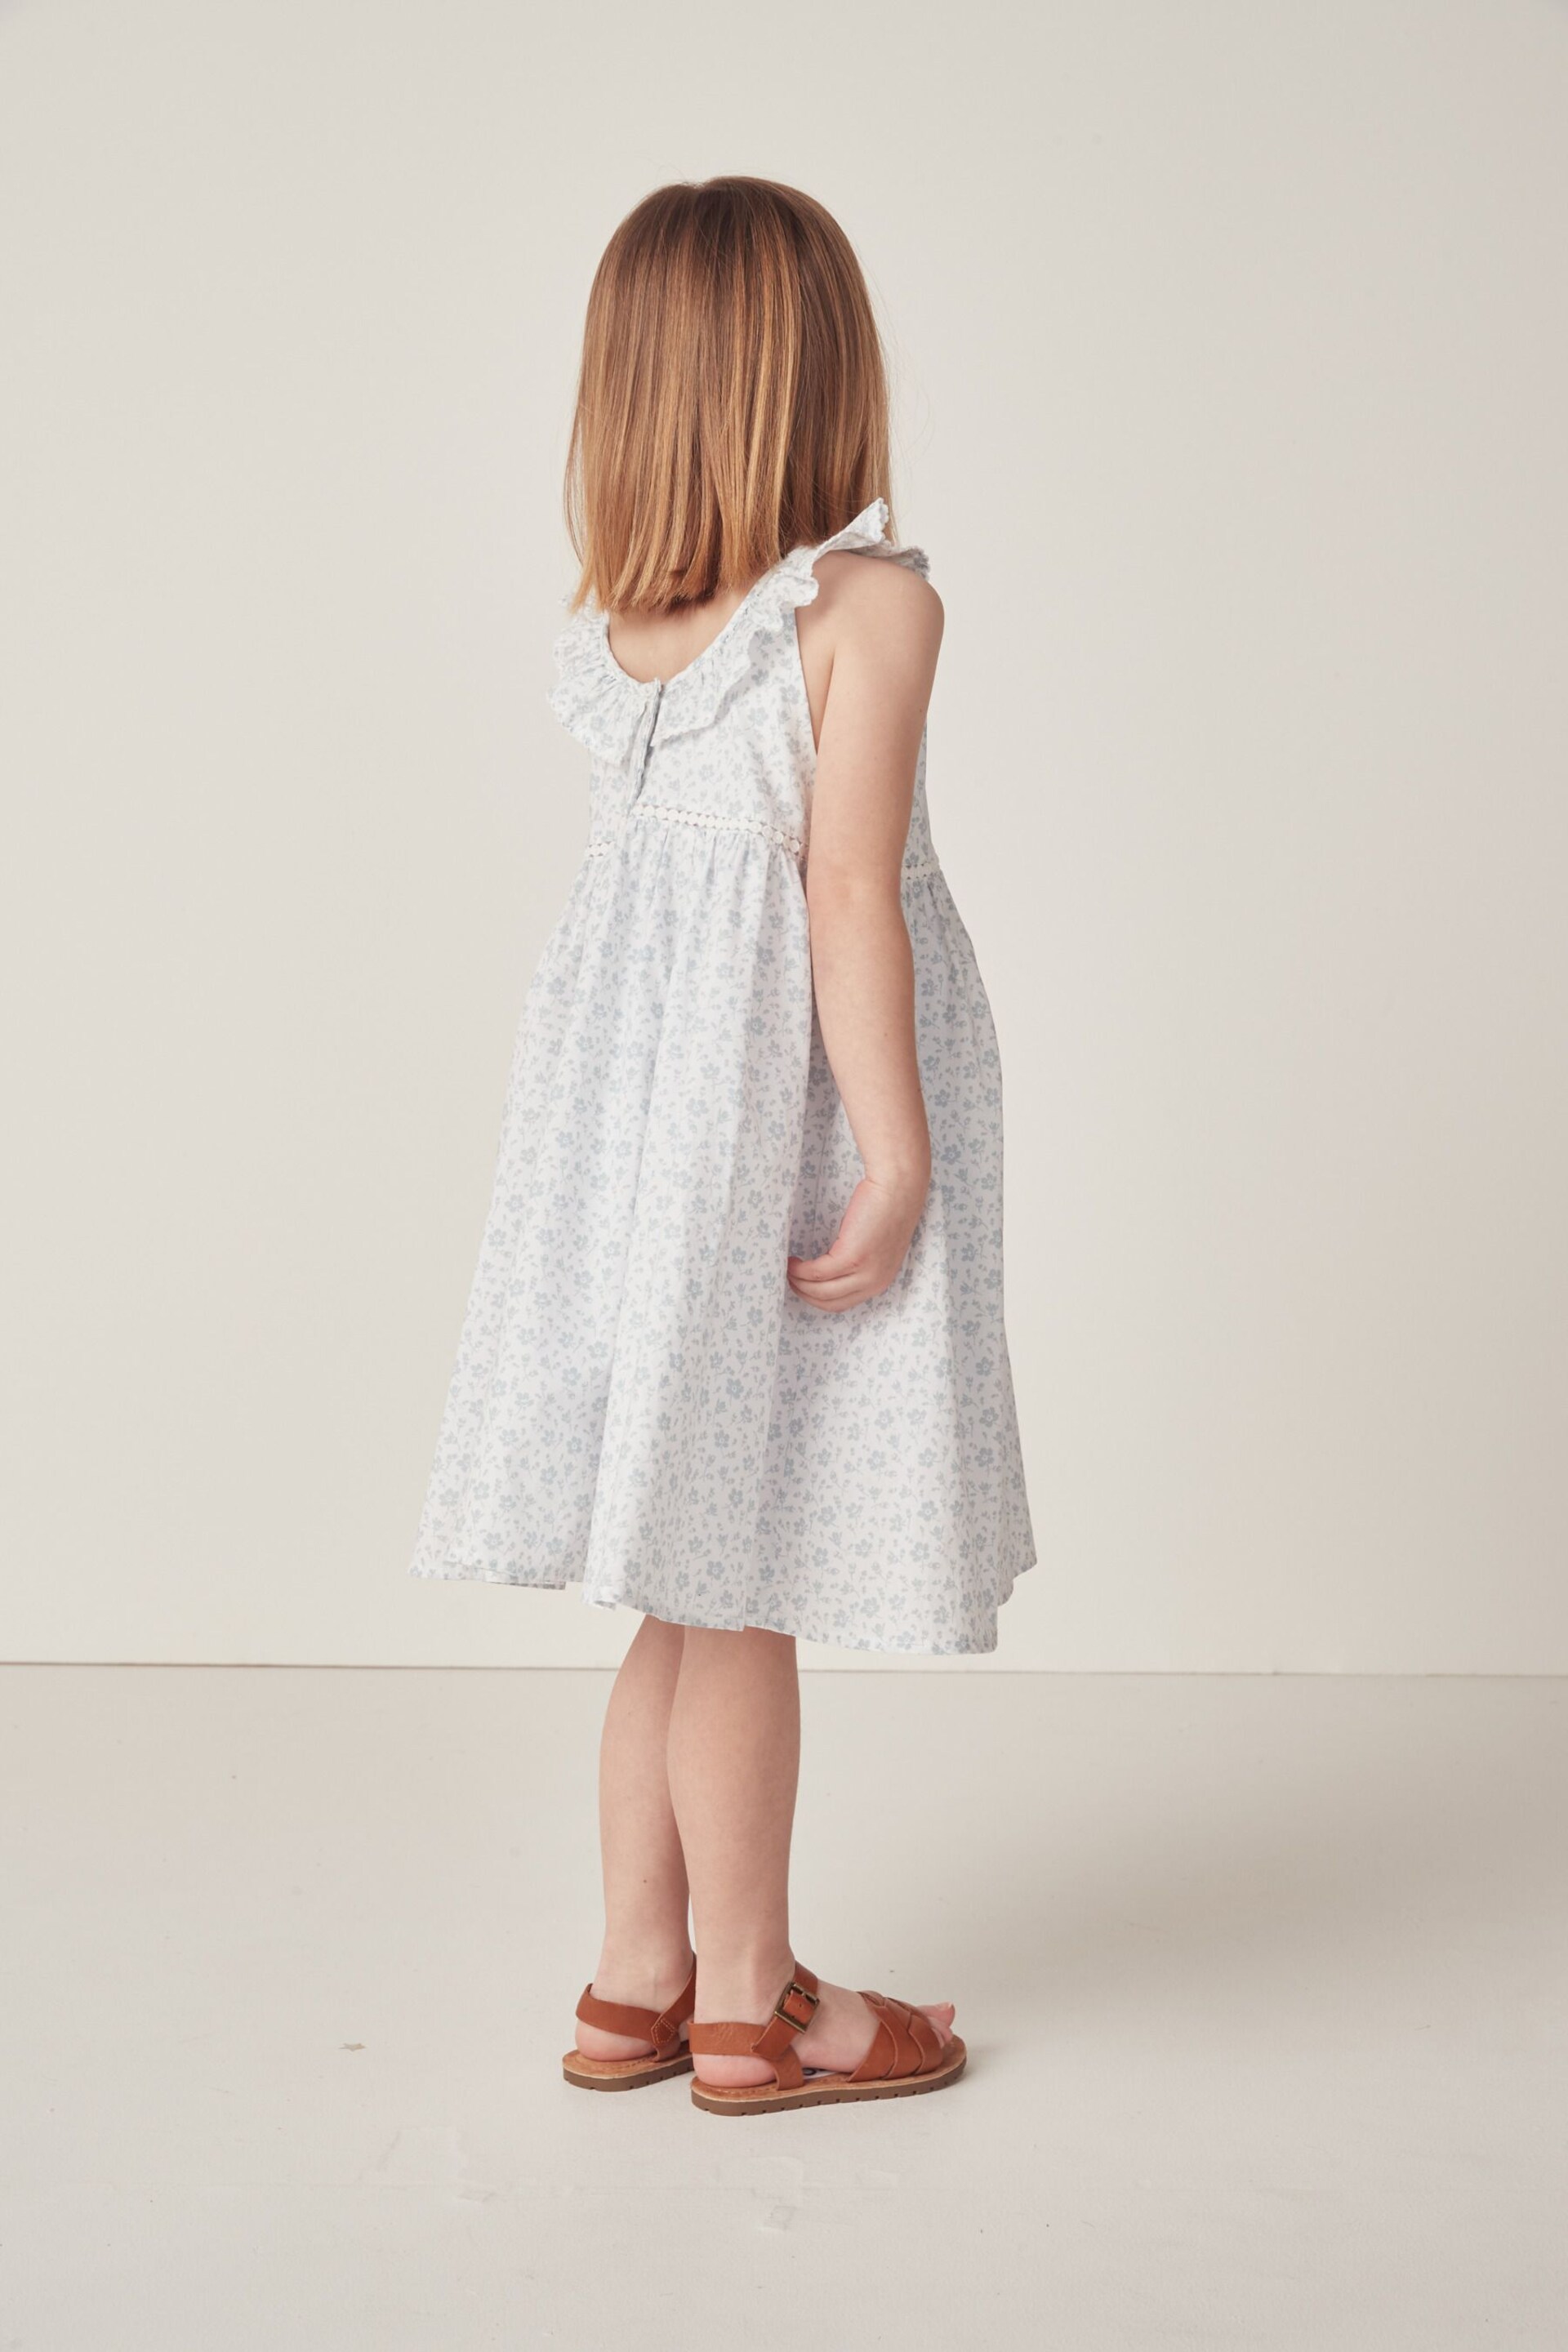 The White Company Blue Margot Floral Cotton Swing Dress - Image 2 of 12